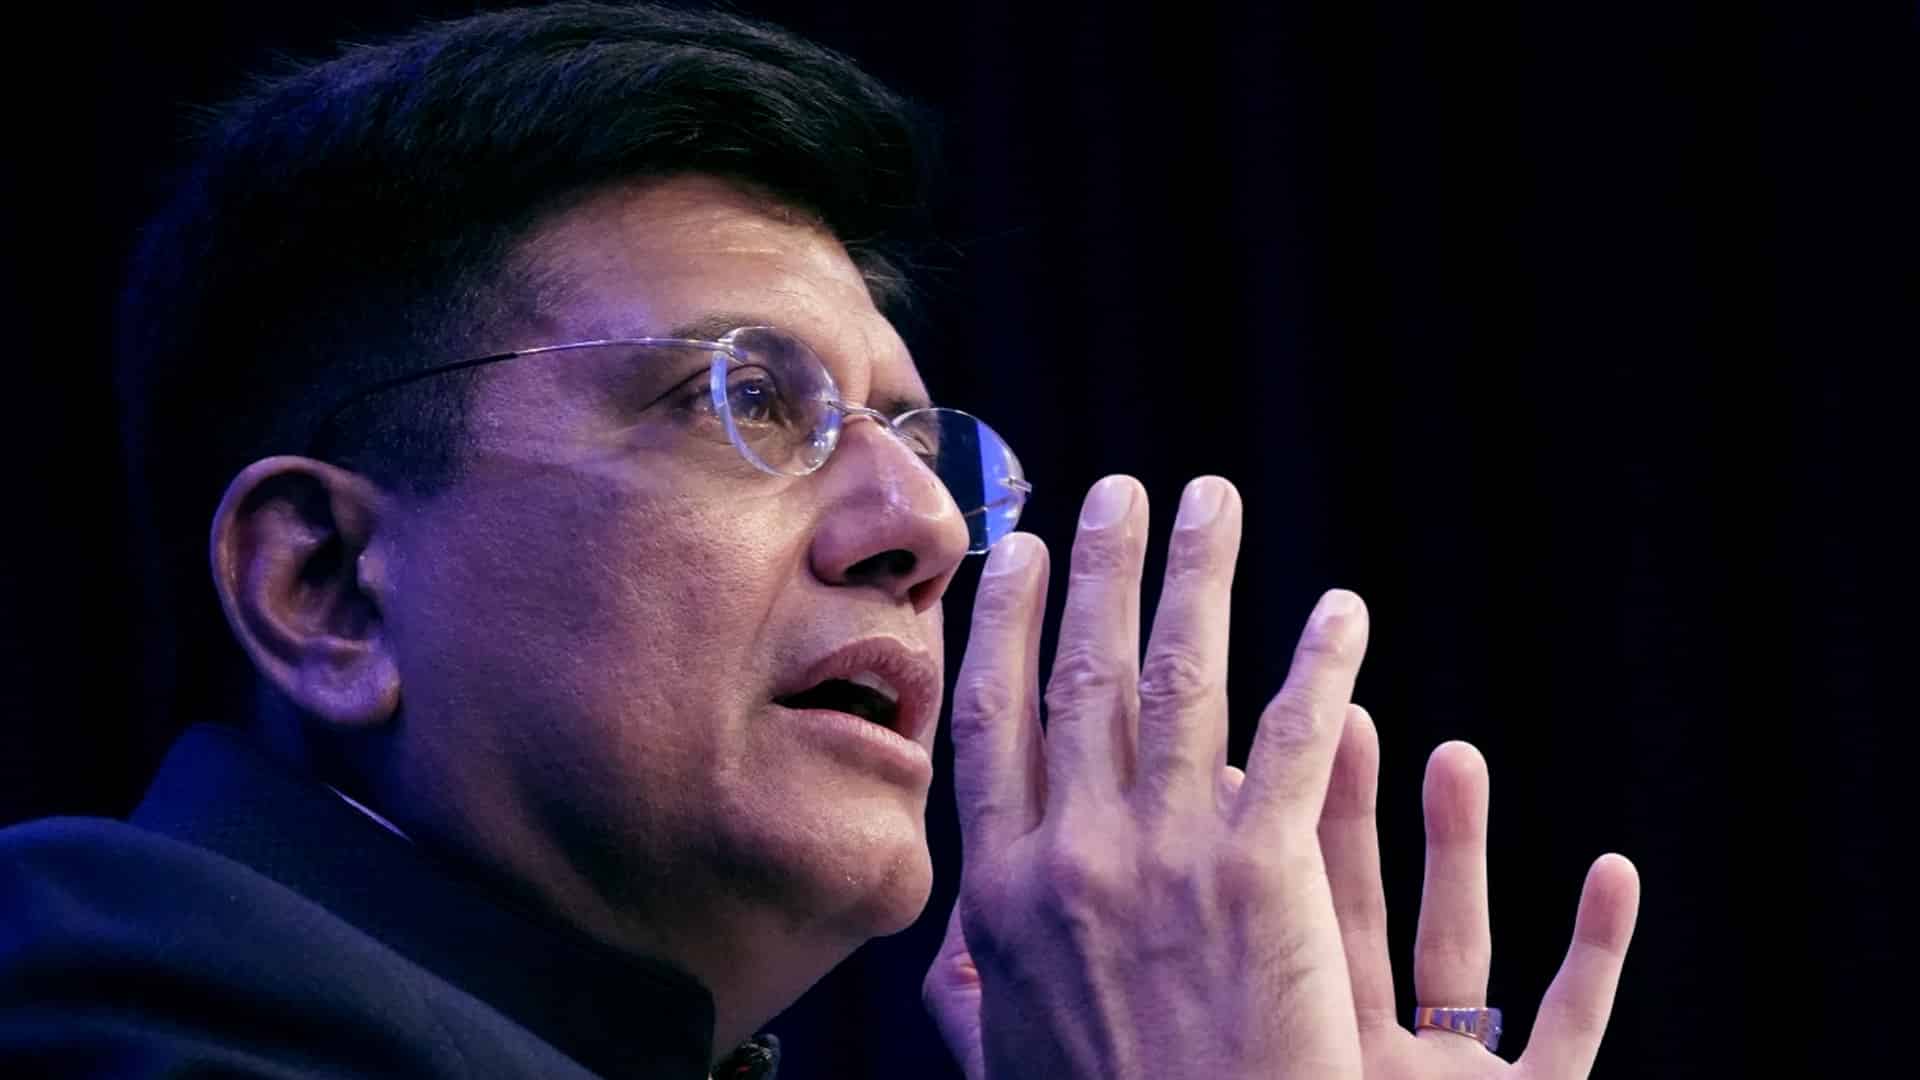 Indian exports at nearly USD 15 bn till mid-August: Goyal